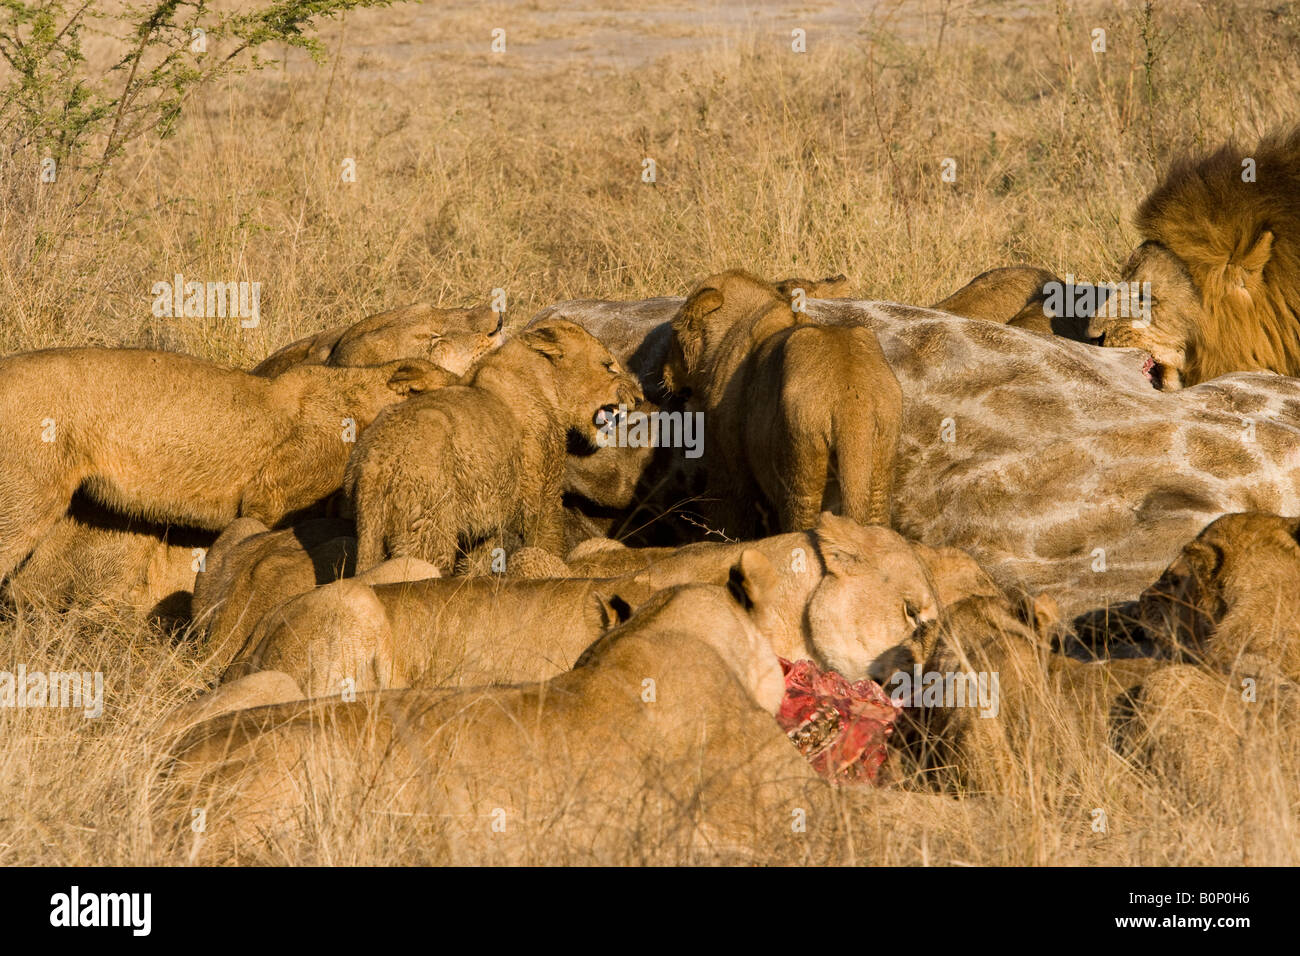 Large Pride of African Lions fight as they feed on prey a recent giraffe kill male lion eating with group wildlife attraction Okavango Botswana Africa Stock Photo